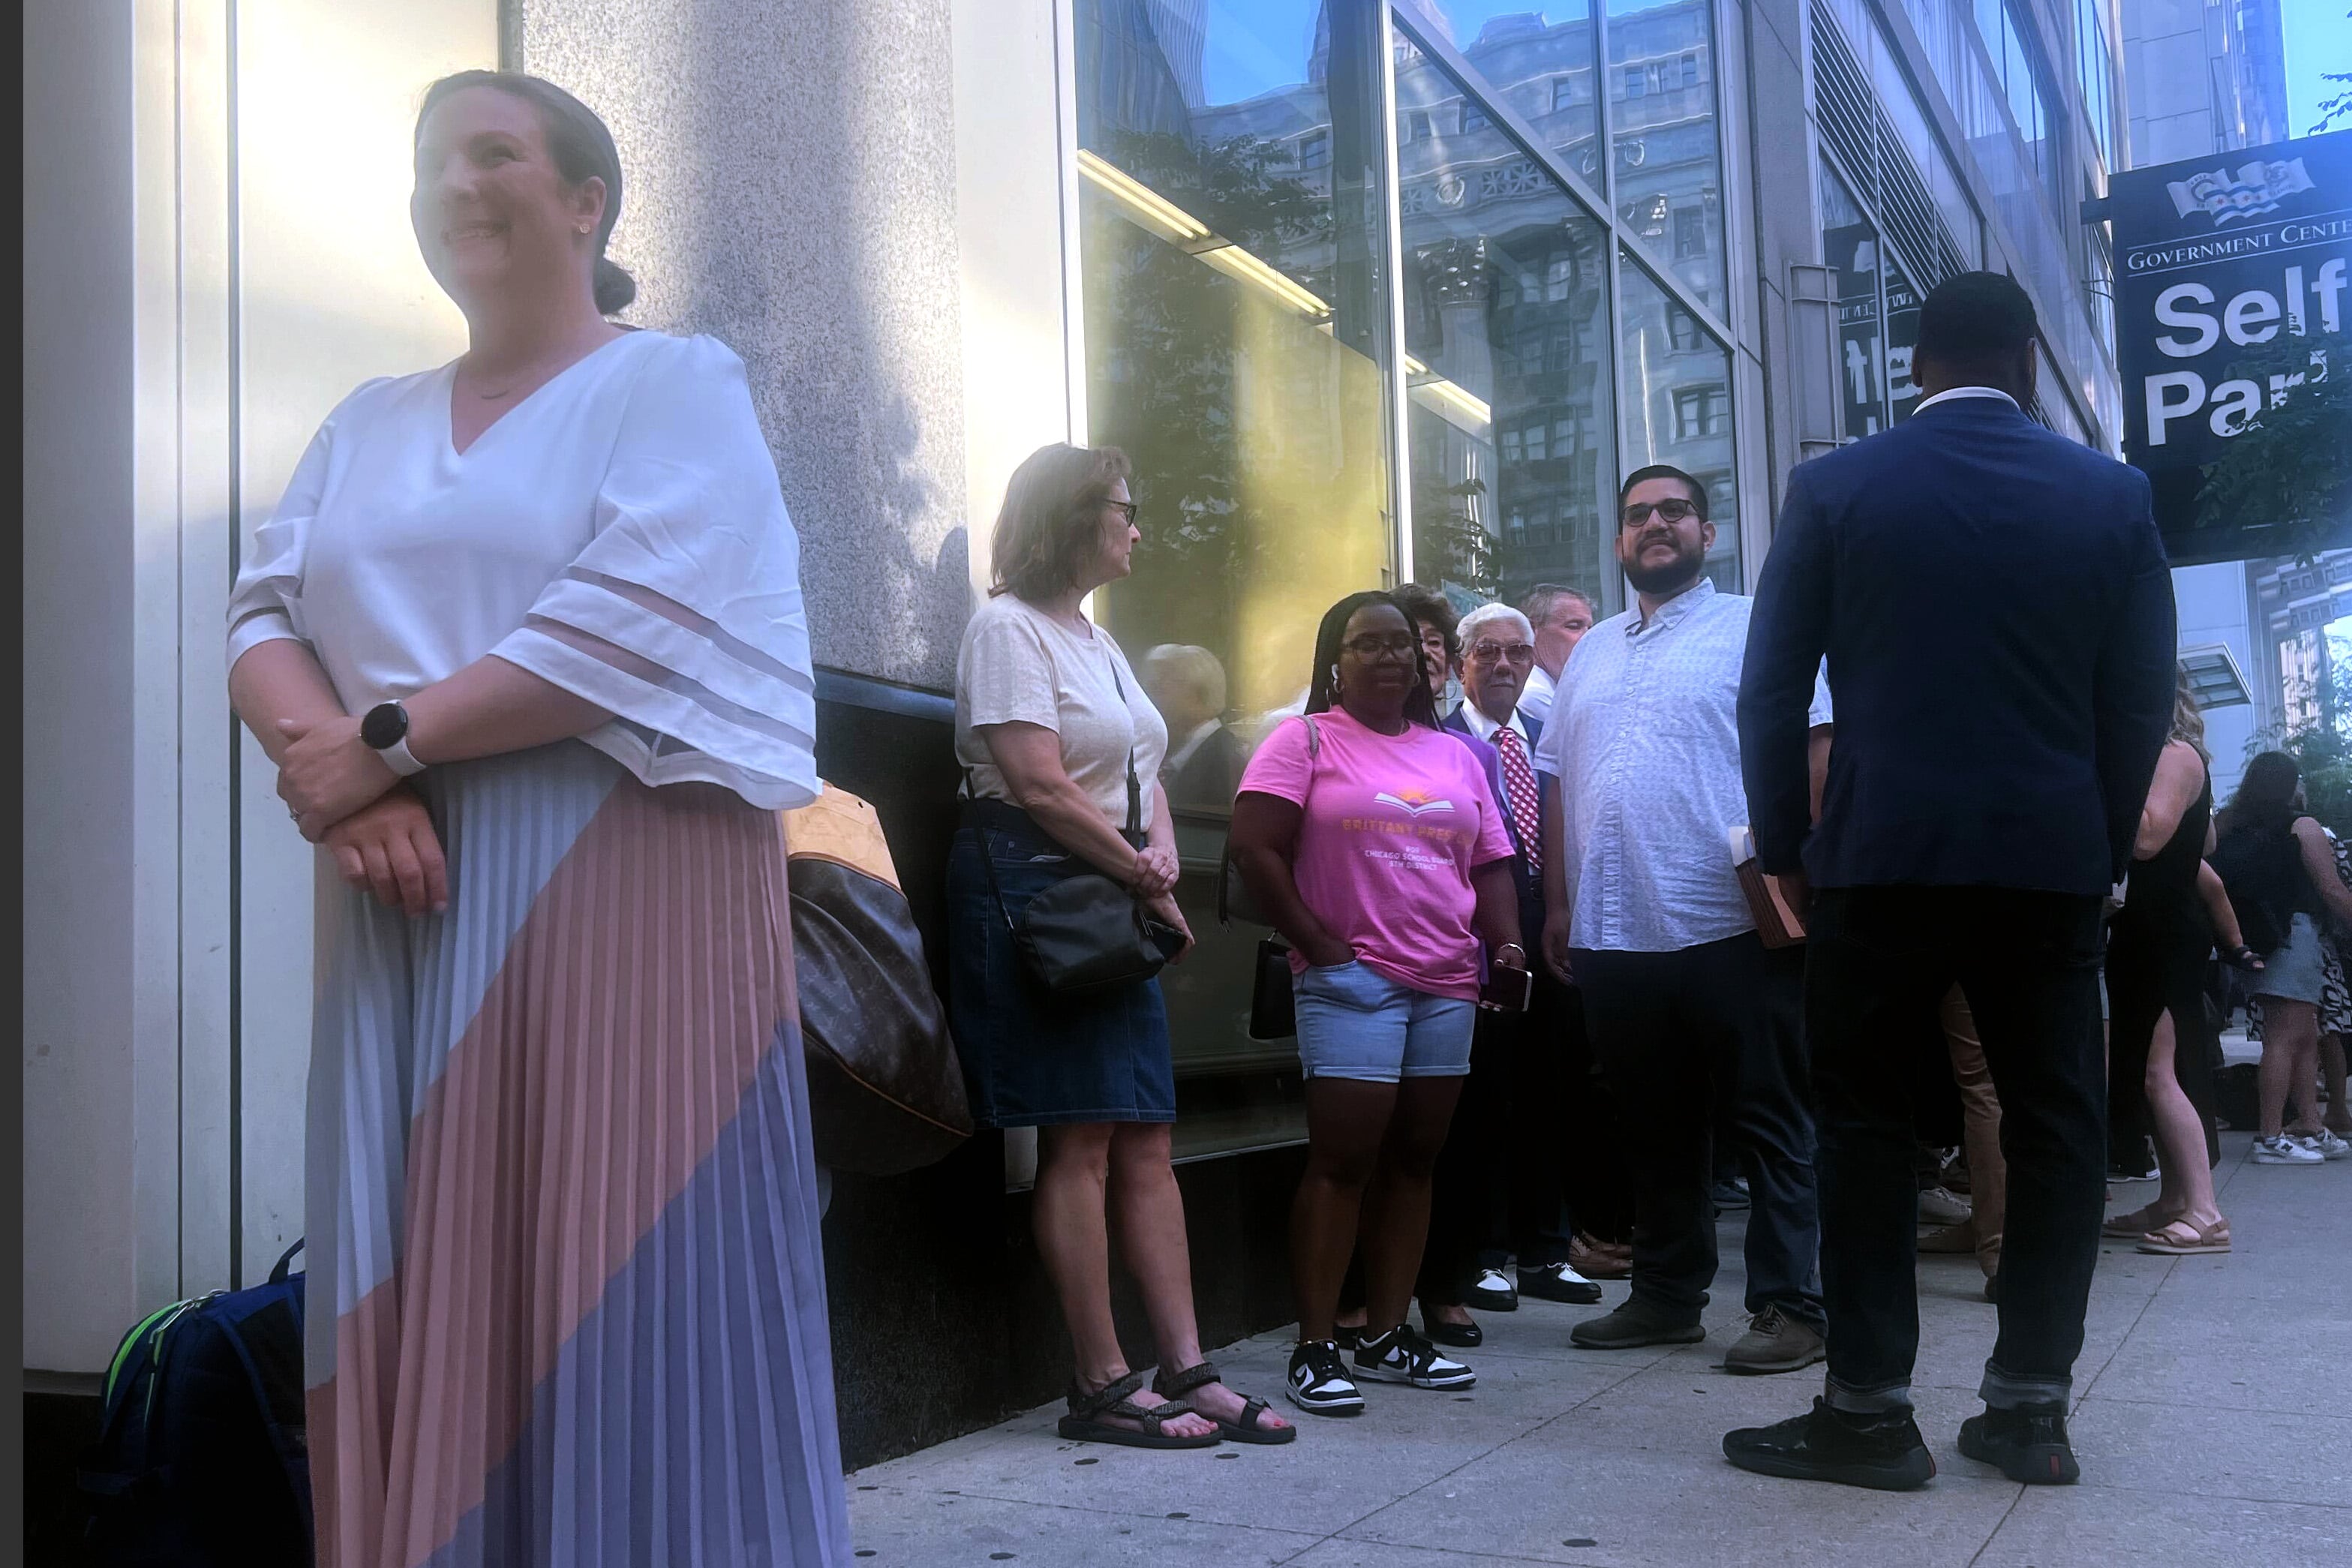 A woman in a white top stands in front of a line of people outside a building.